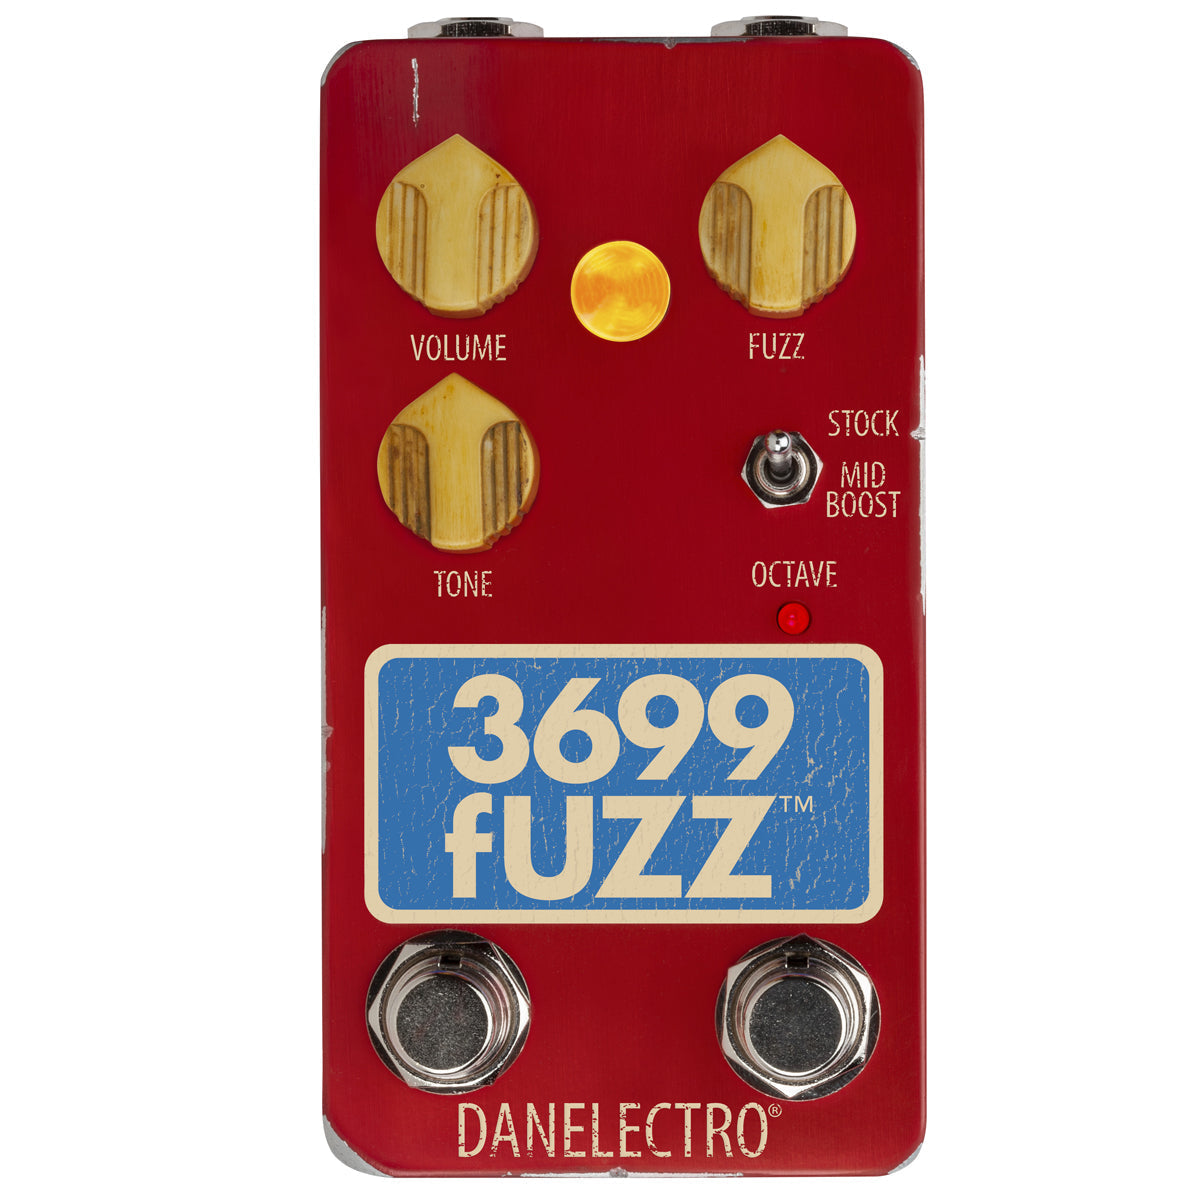 Danelectro 3699 fUZZ Pedal, Effect Pedals for sale at Richards Guitars.